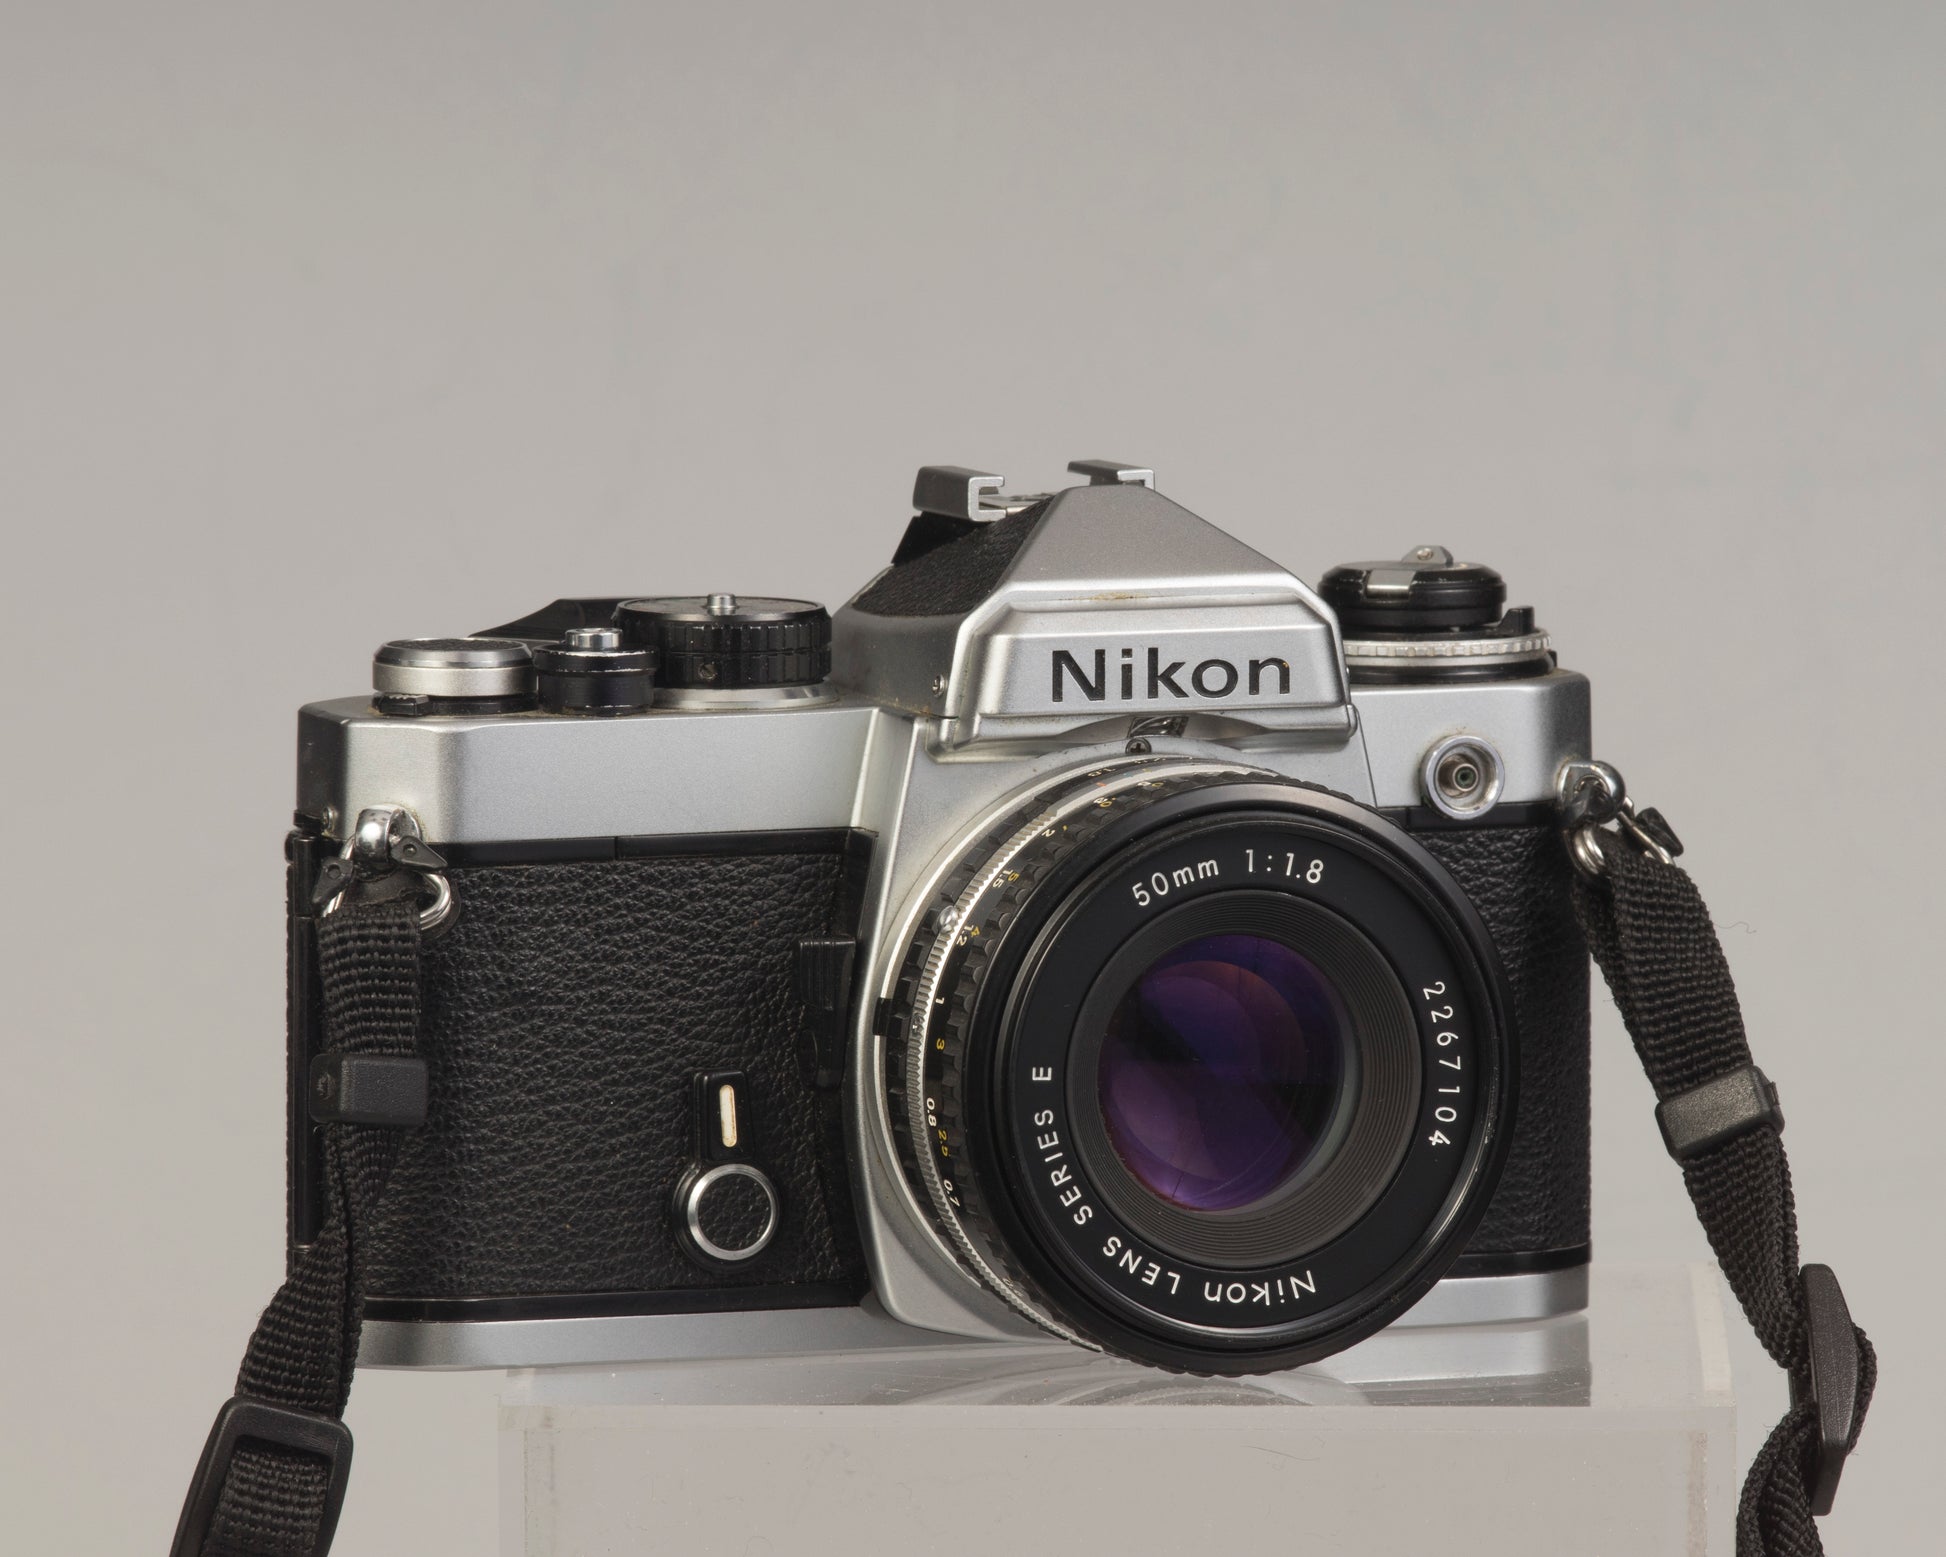 Nikon FE 35mm film SLR camera with Nikon E 50mm f1.8 lens. Available at New Wave Pool, Montreal.